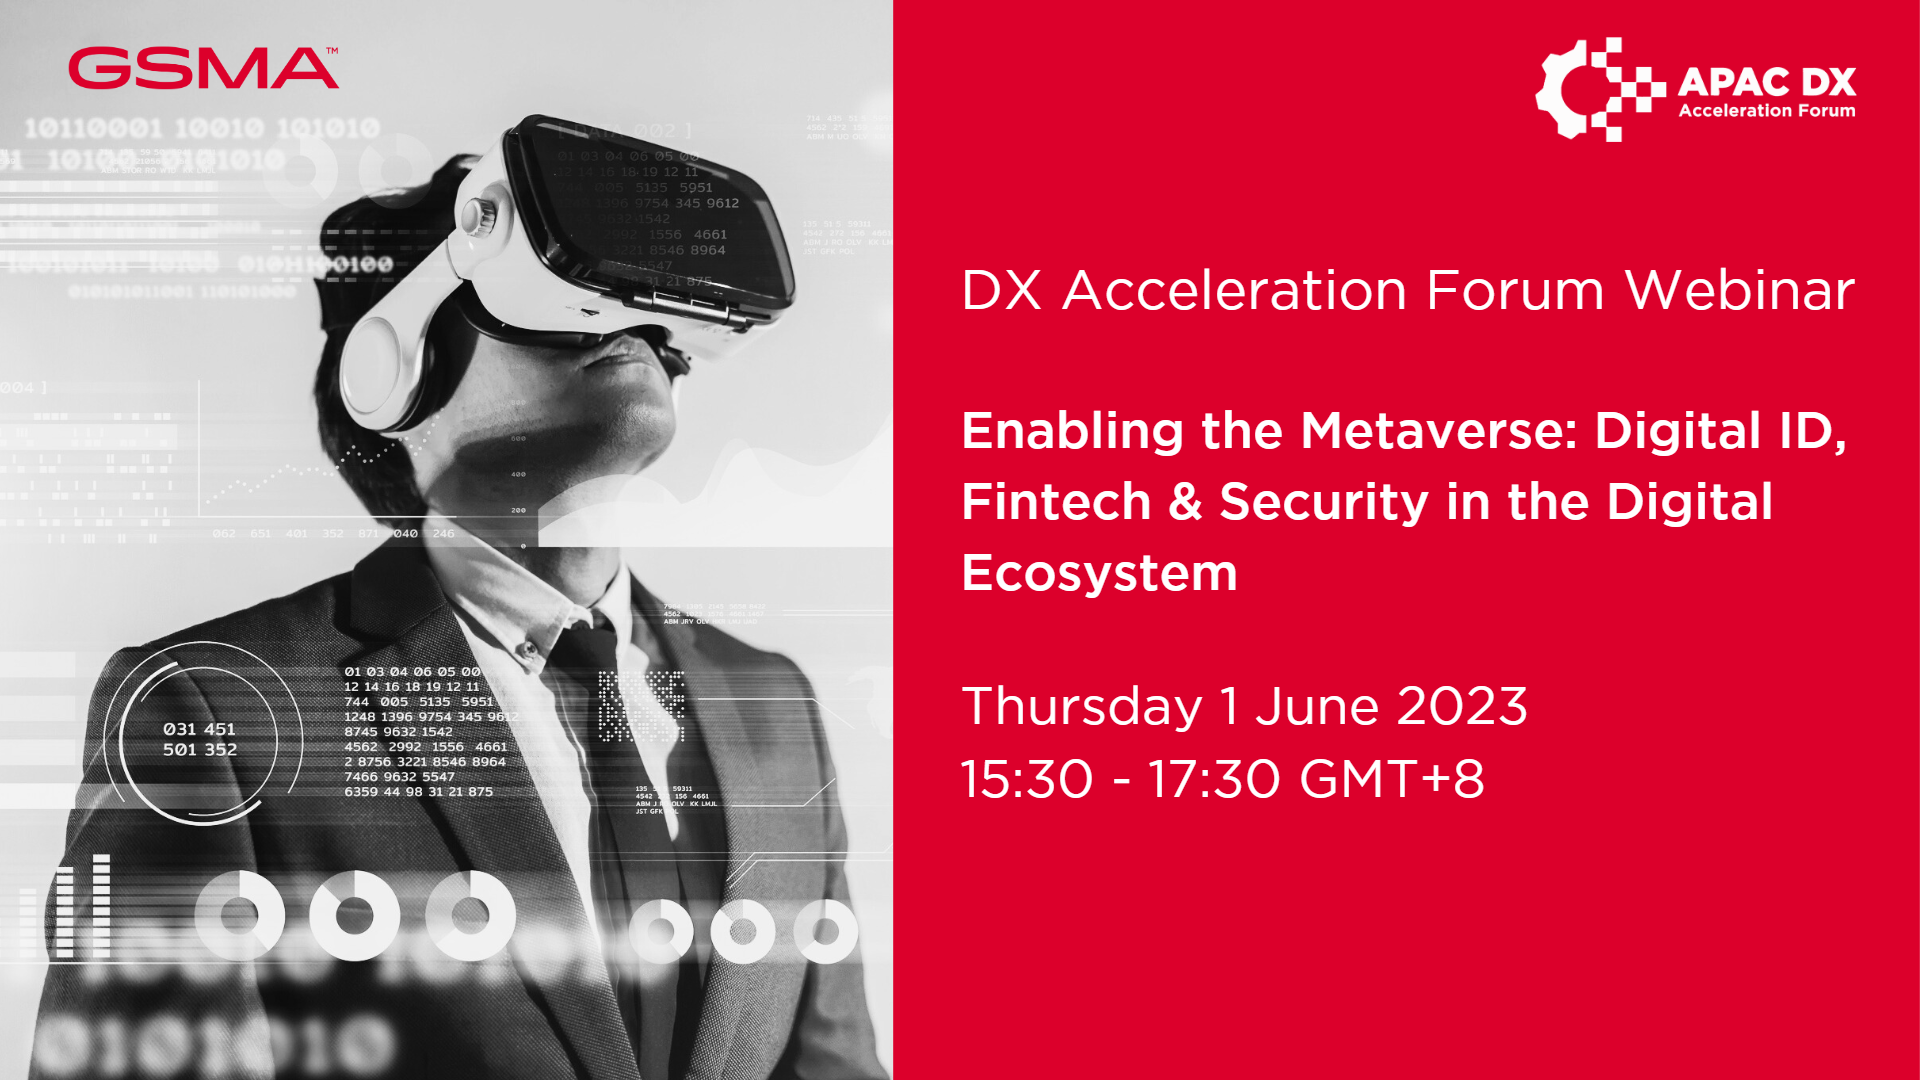 DX Acceleration Forum: Enabling the Metaverse: Digital ID, Fintech & Security in the Digital Ecosystem